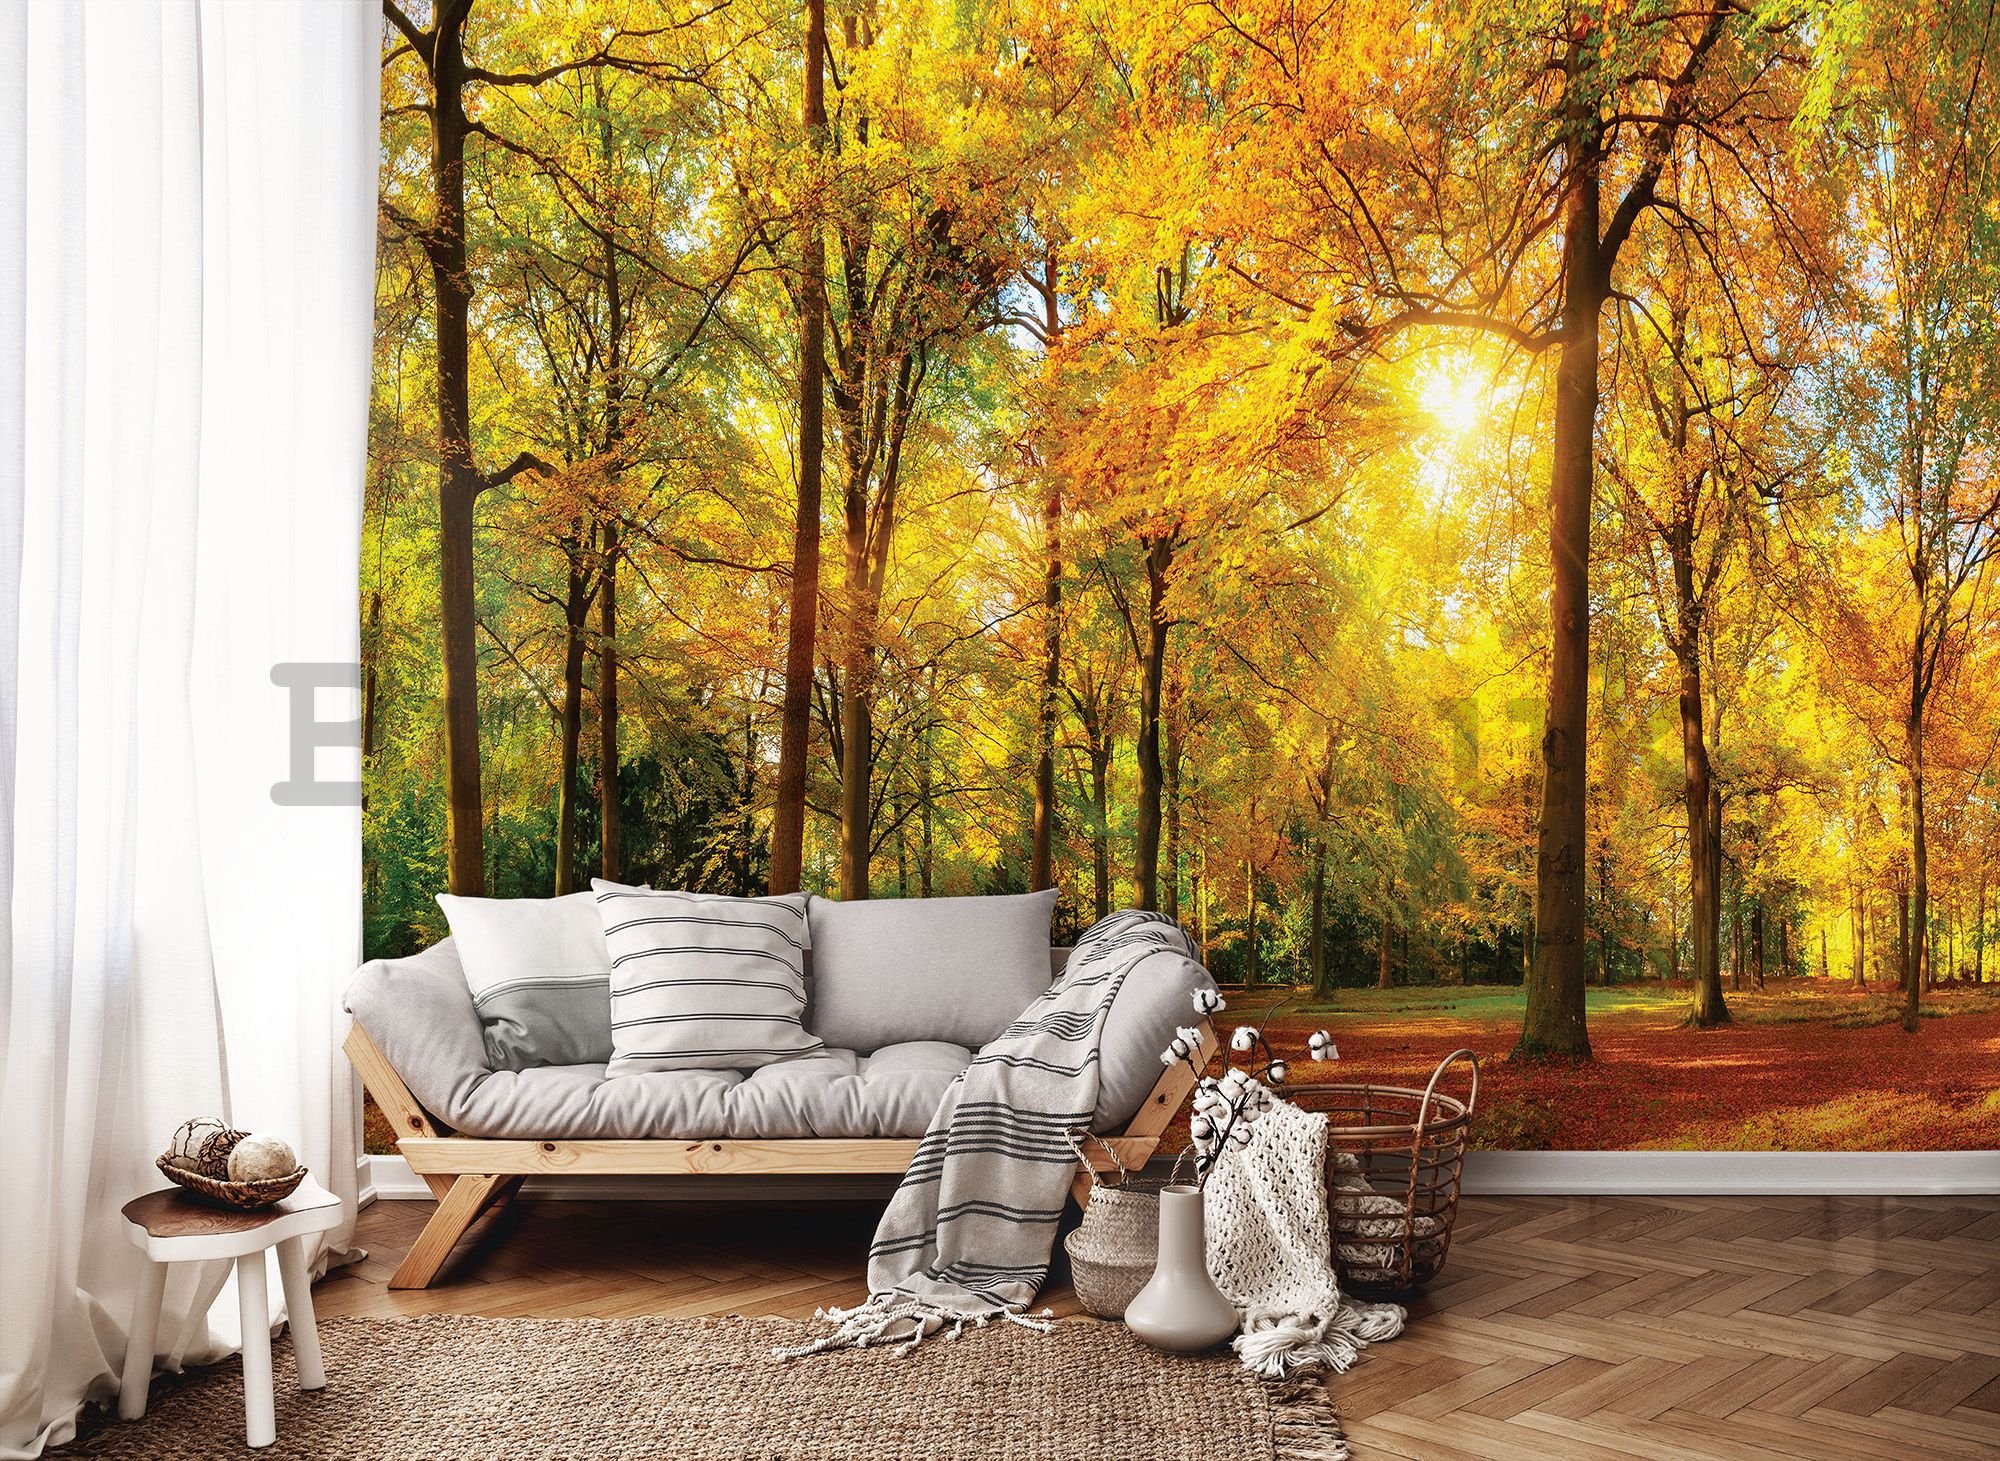 Wall mural: Fallen leaves in the forest - 254x368 cm